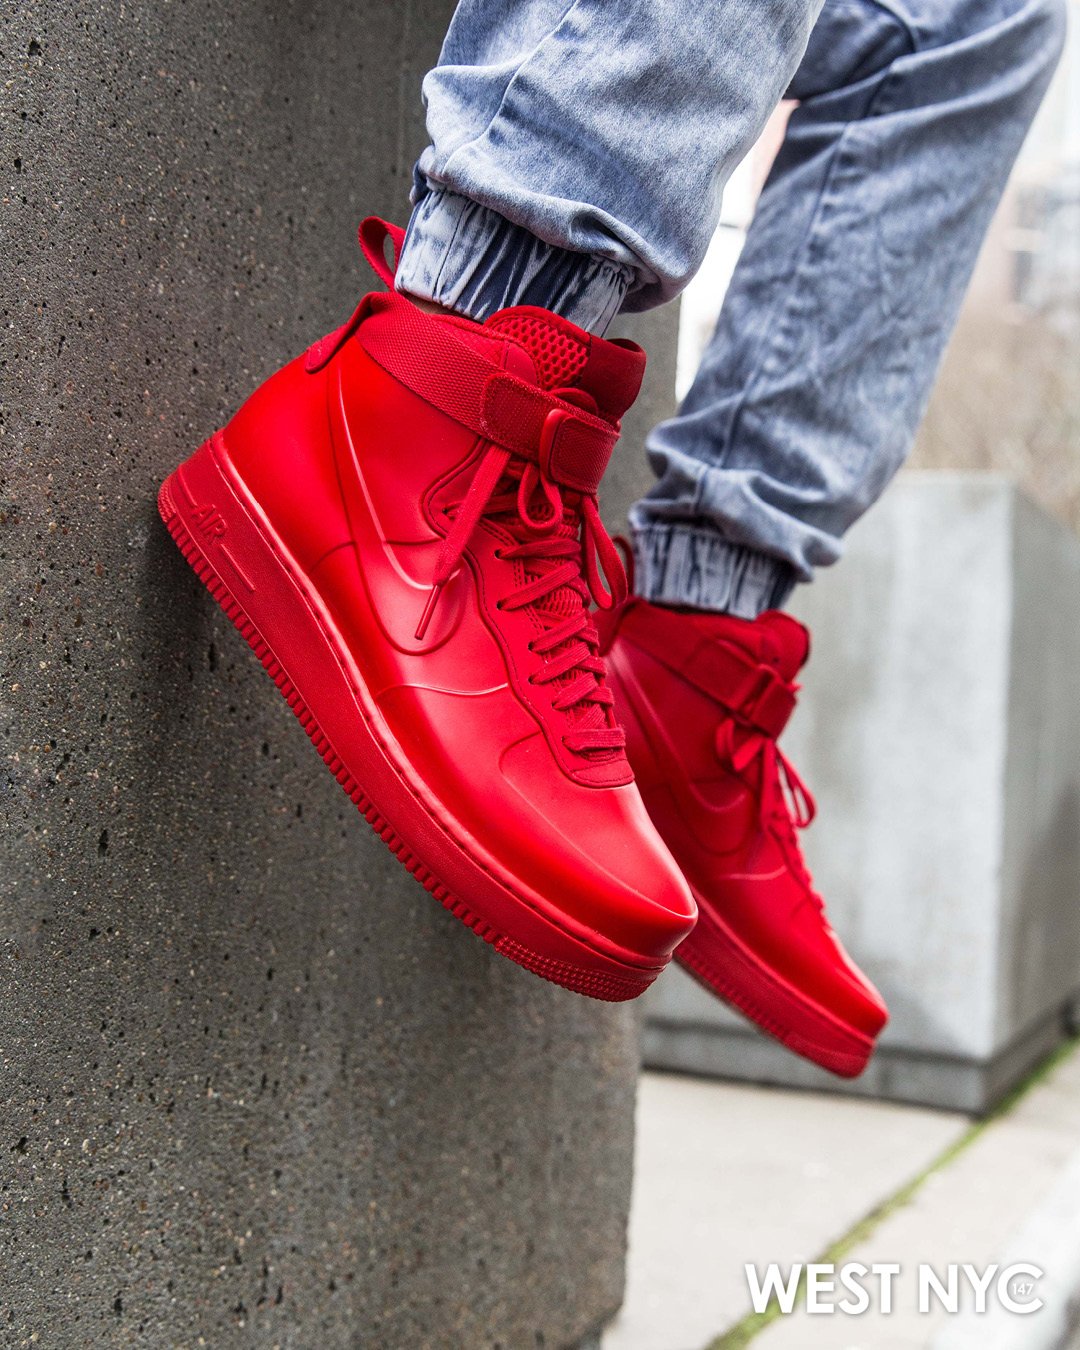 West NYC on X: "Red to the floor, this @Nike Air Force 1 #Foamposite is an  unbelievable shade and quite the statement piece! Available now in store  and online at https://t.co/bO324wzBu1 https://t.co/BEKzvlDPLB" /